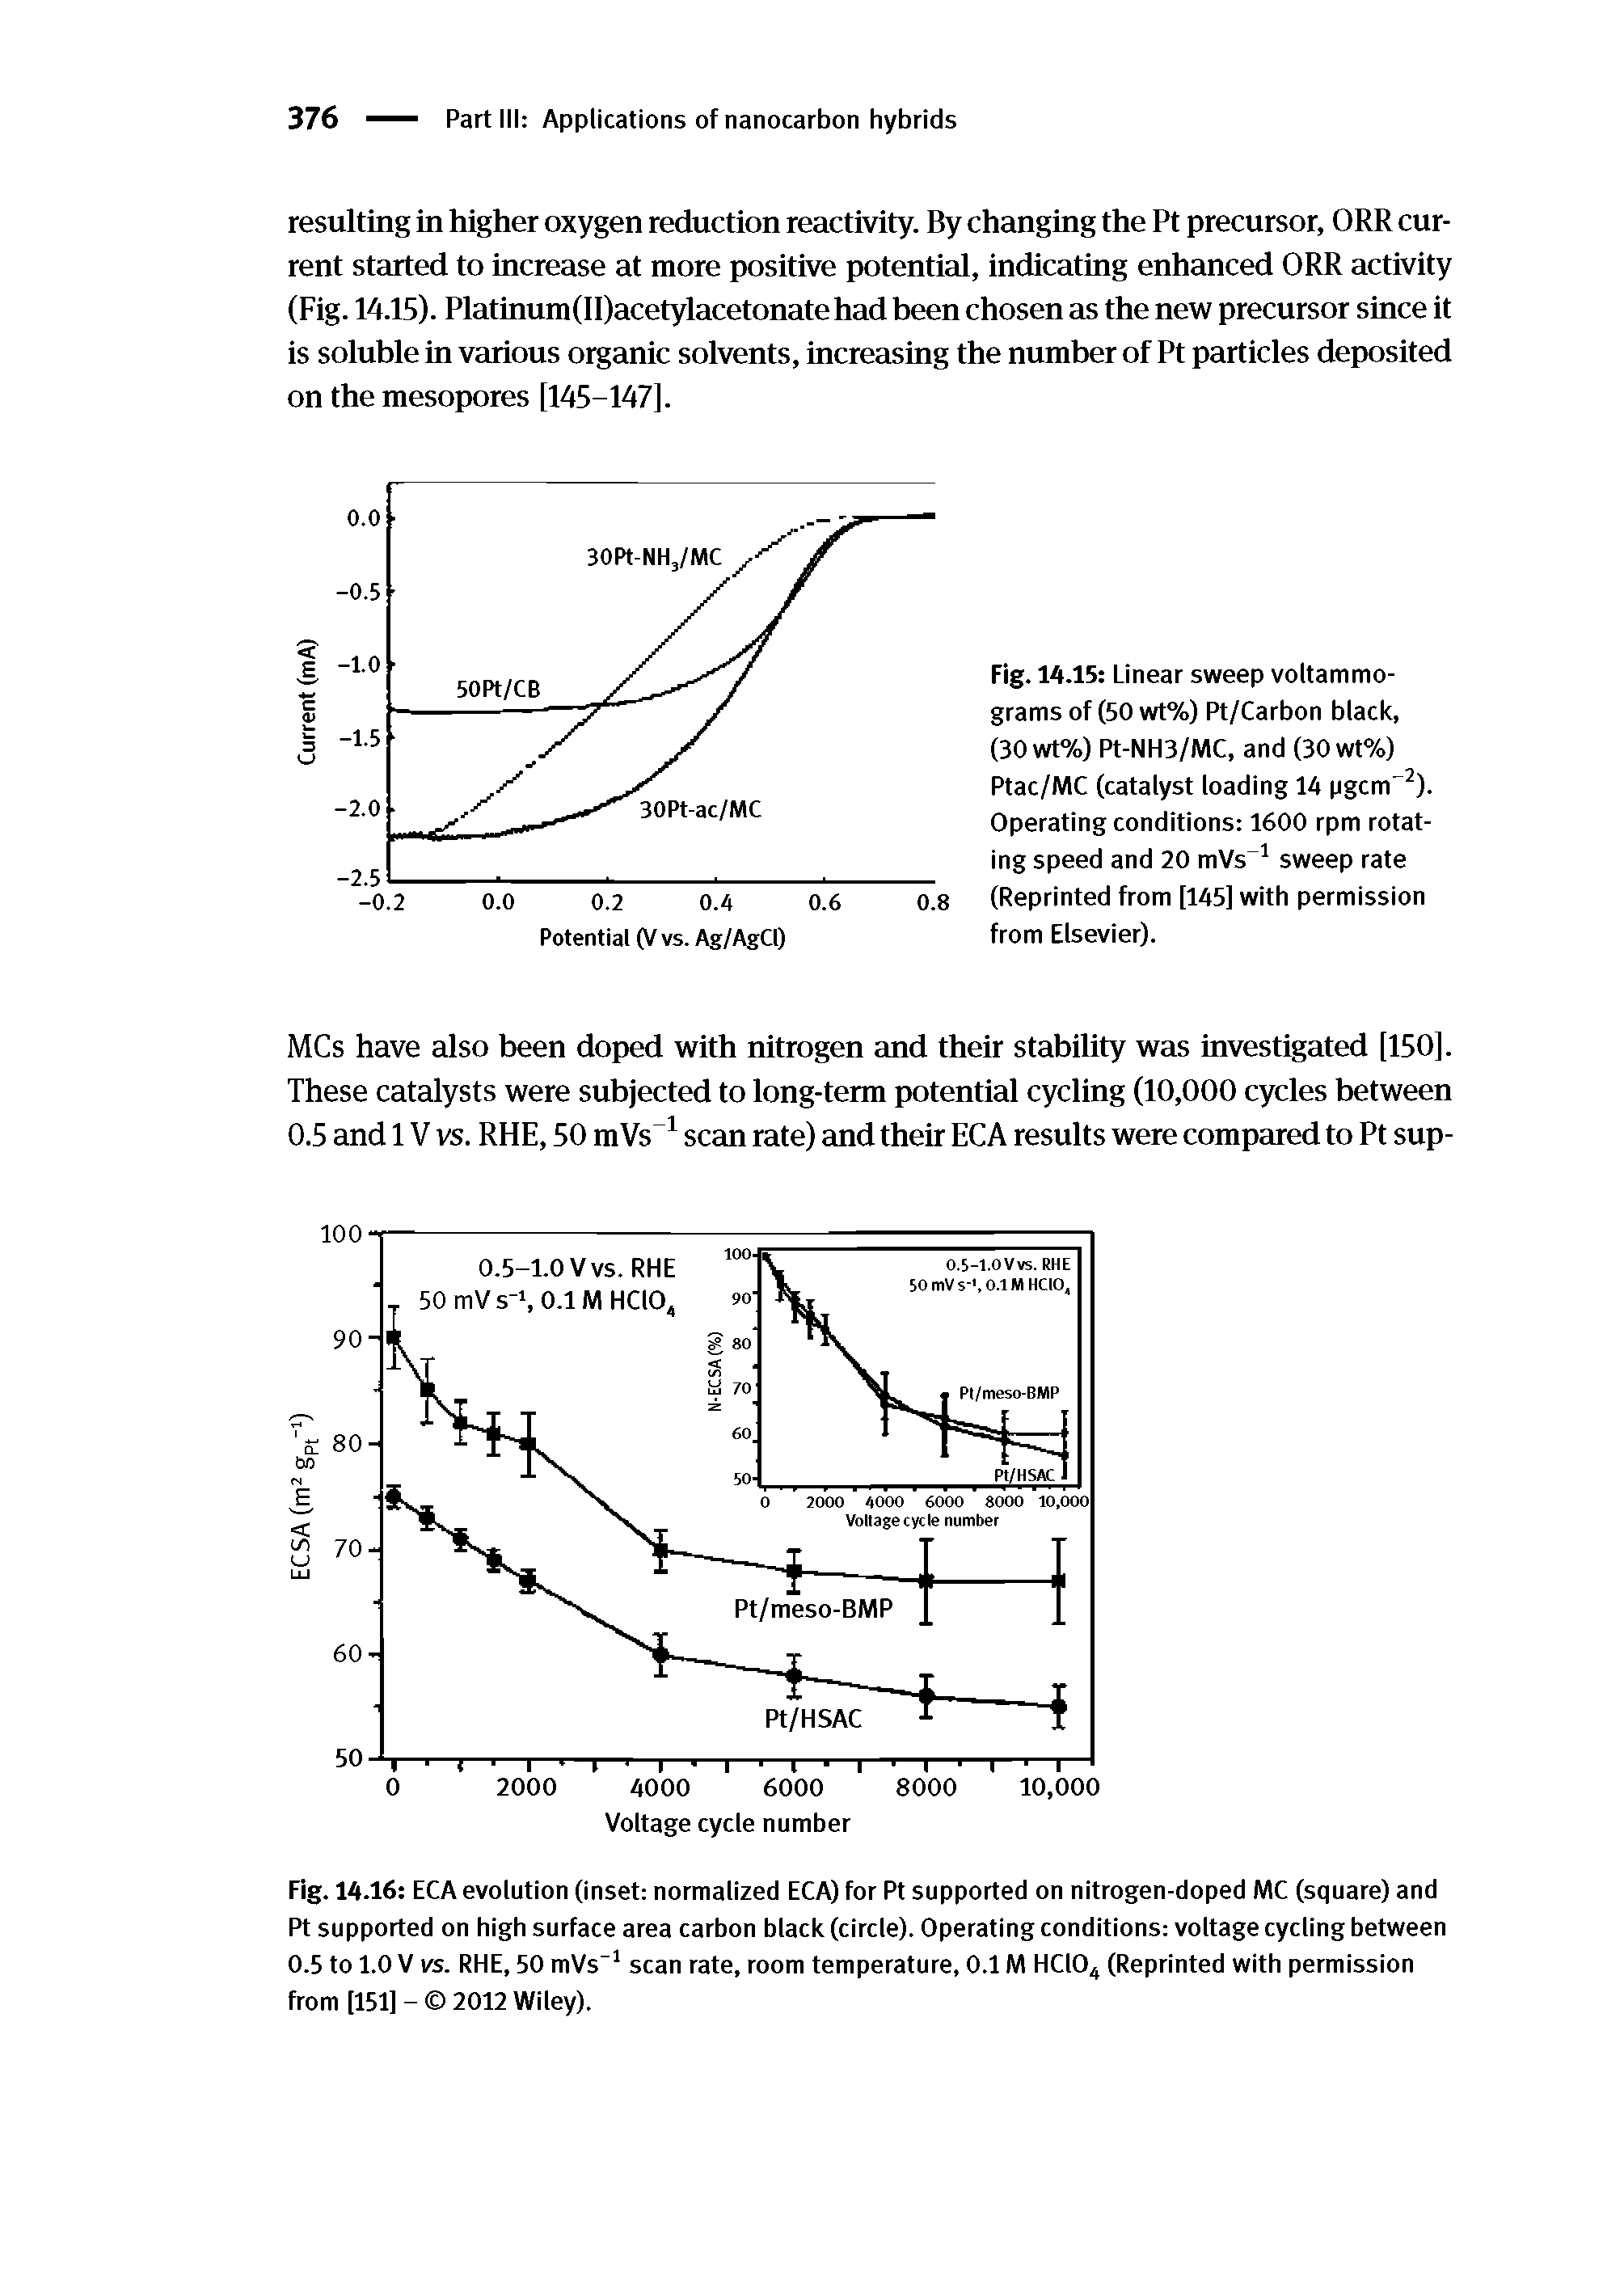 Fig. 14.16 ECA evolution (inset normalized ECA) for Pt supported on nitrogen-doped MC (square) and Pt supported on high surface area carbon black (circle). Operating conditions voltage cycling between 0.5 to 1.0 V vs. RHE, 50 mVs"1 scan rate, room temperature, 0.1 M HC104 (Reprinted with permission from [151] - 2012 Wiley).